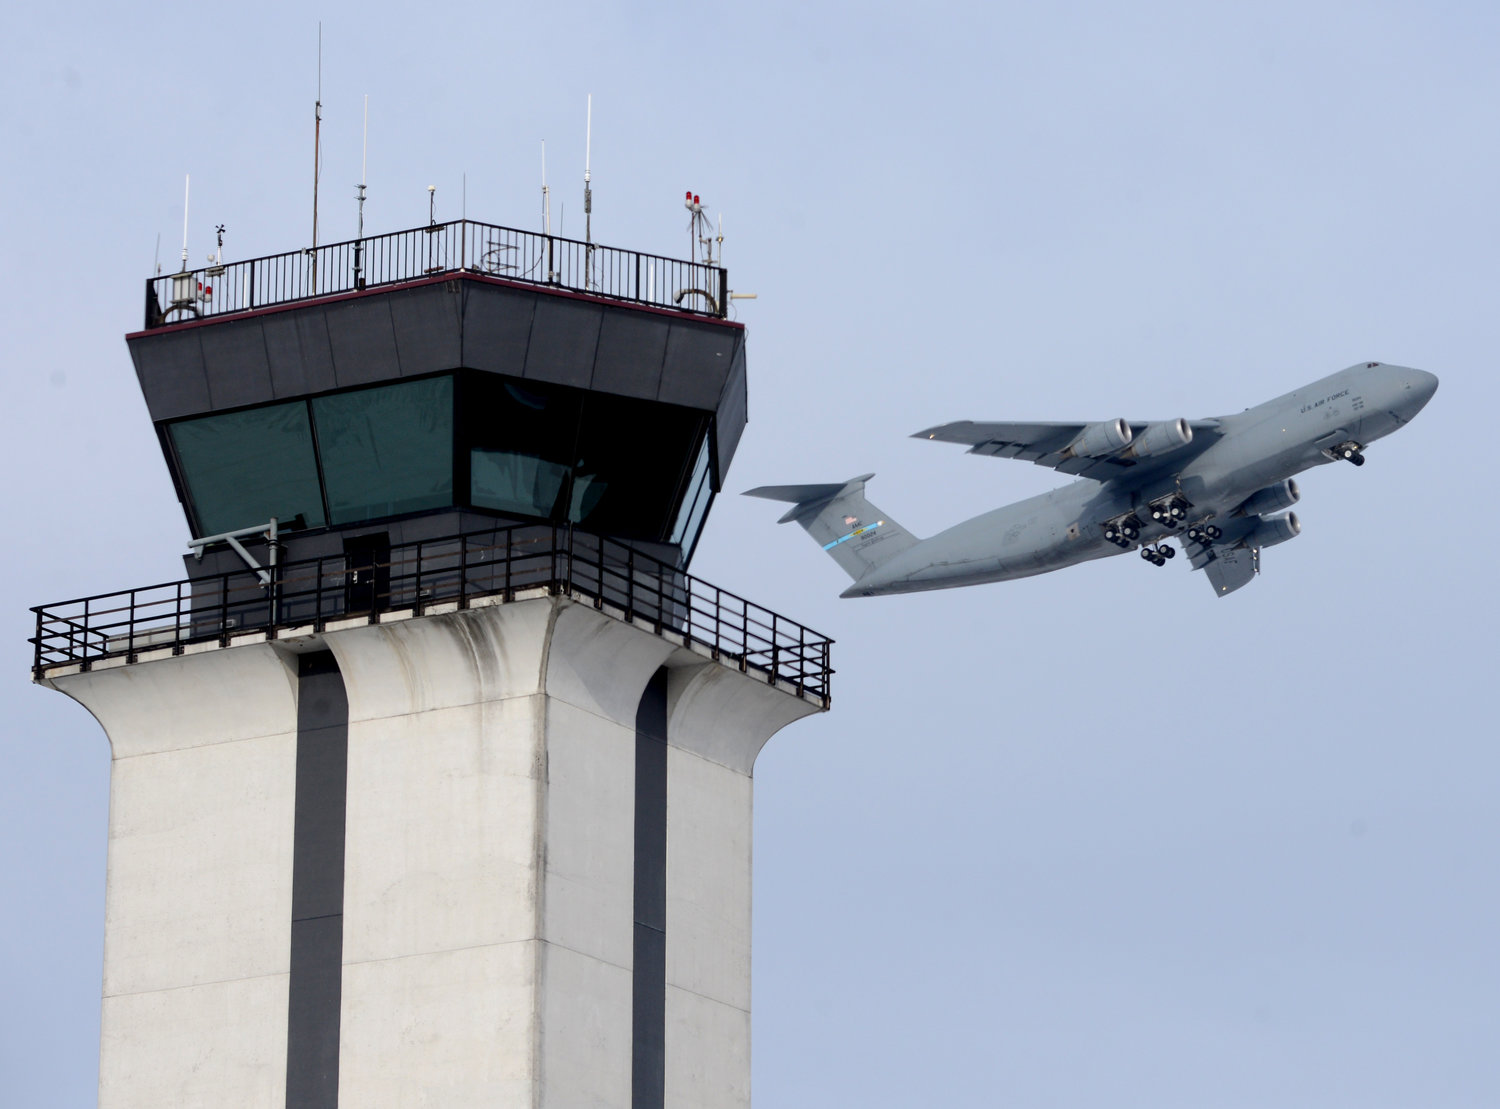 A departing C-5 from Dover lifts off with the Griffiss tower in the foreground.